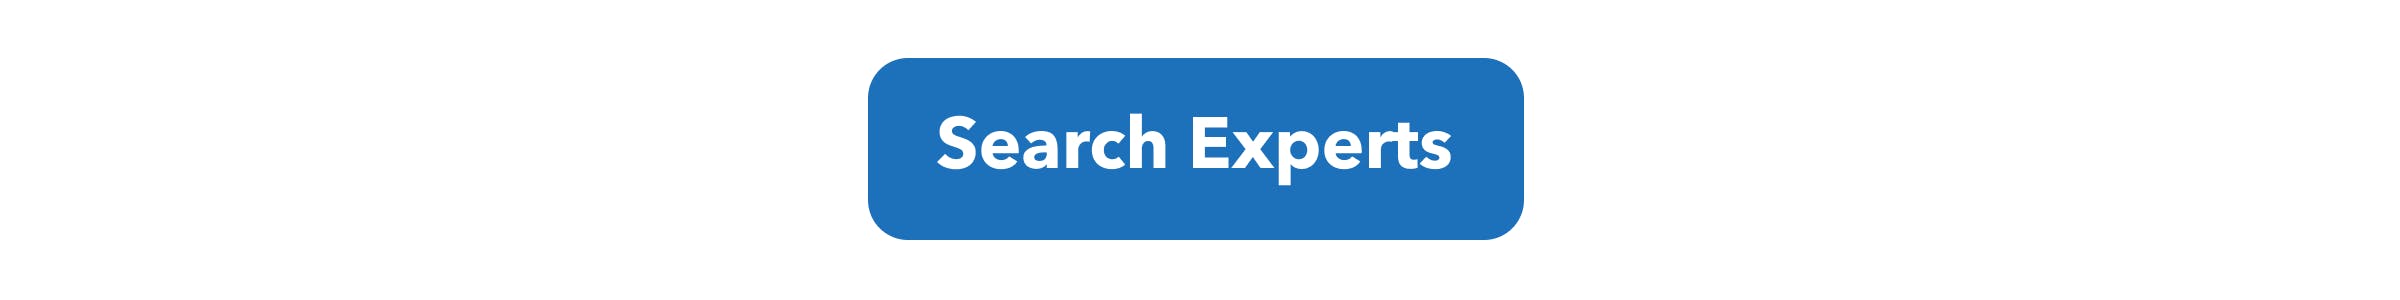 Search Experts button